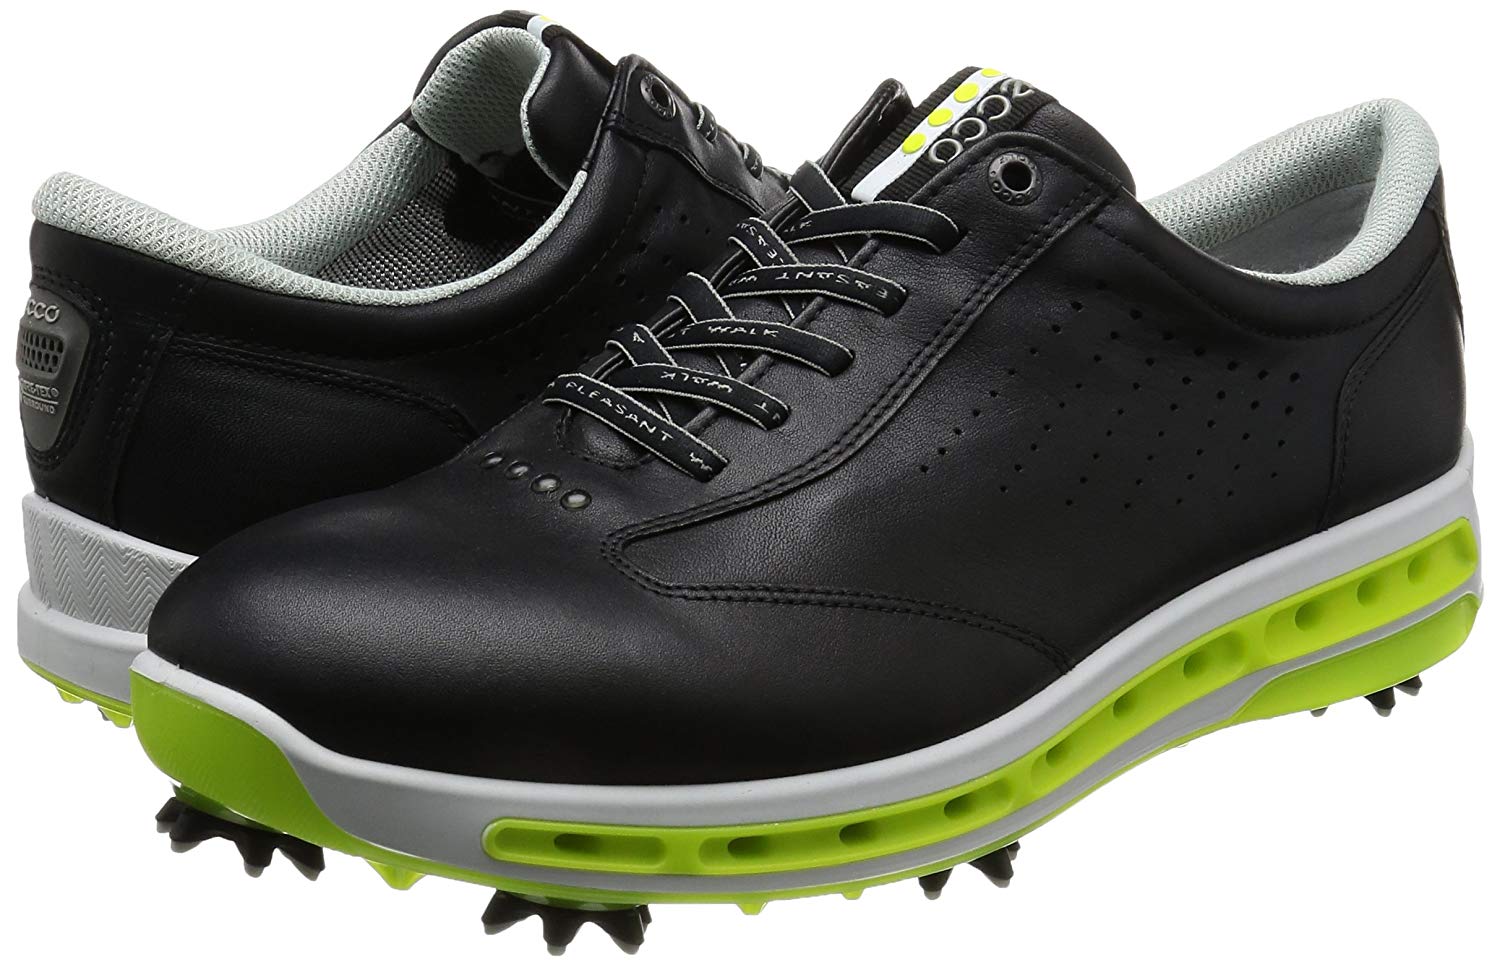 Ecco Cool GTX Reviewed for Performance 